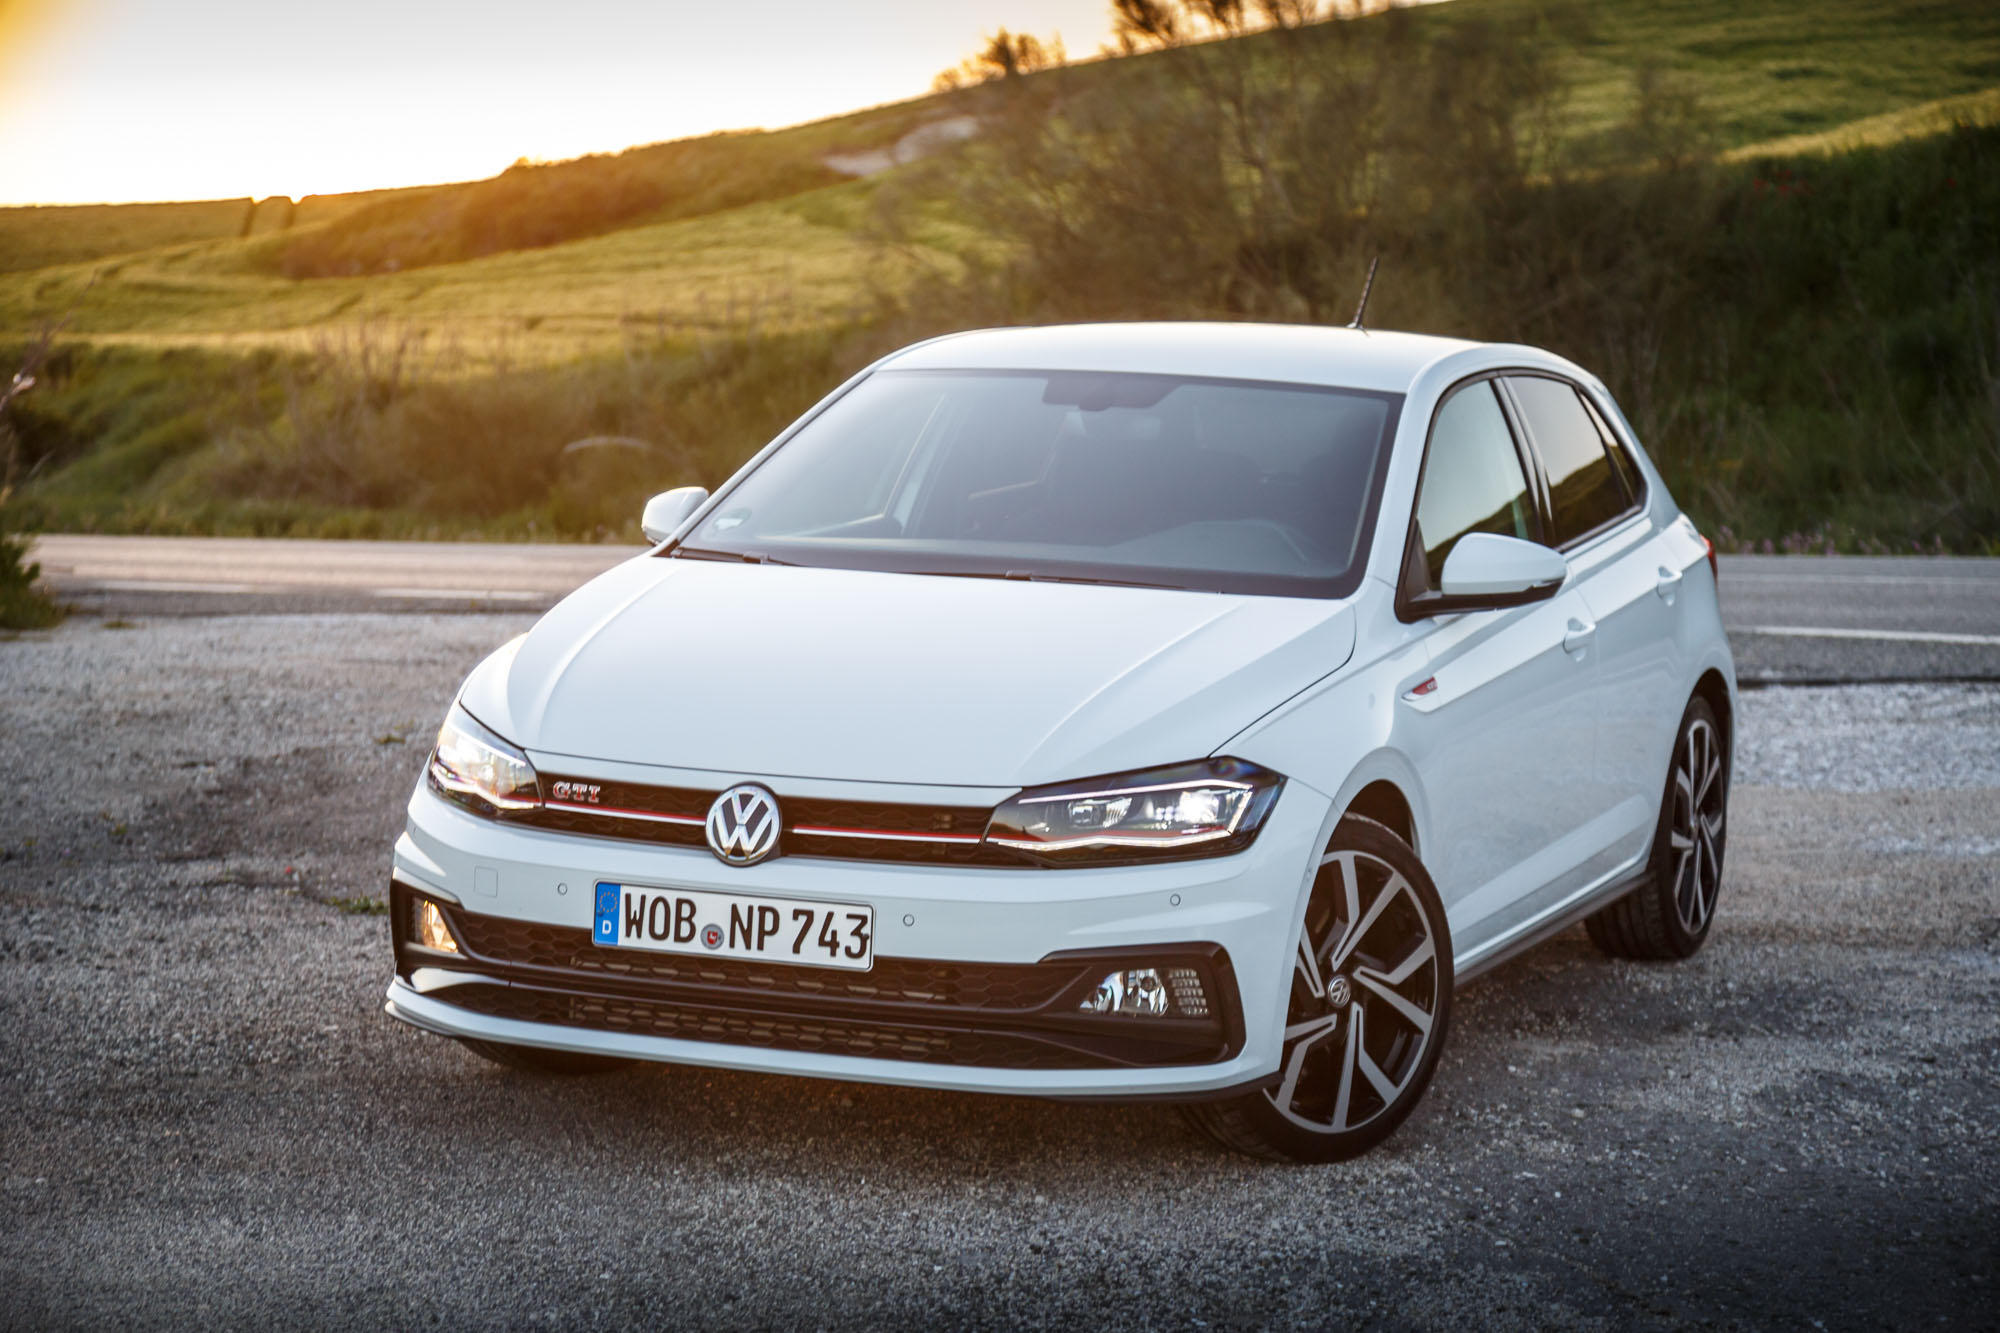 Volkswagen Polo GTI Review (The Polo Closes the Gap on the